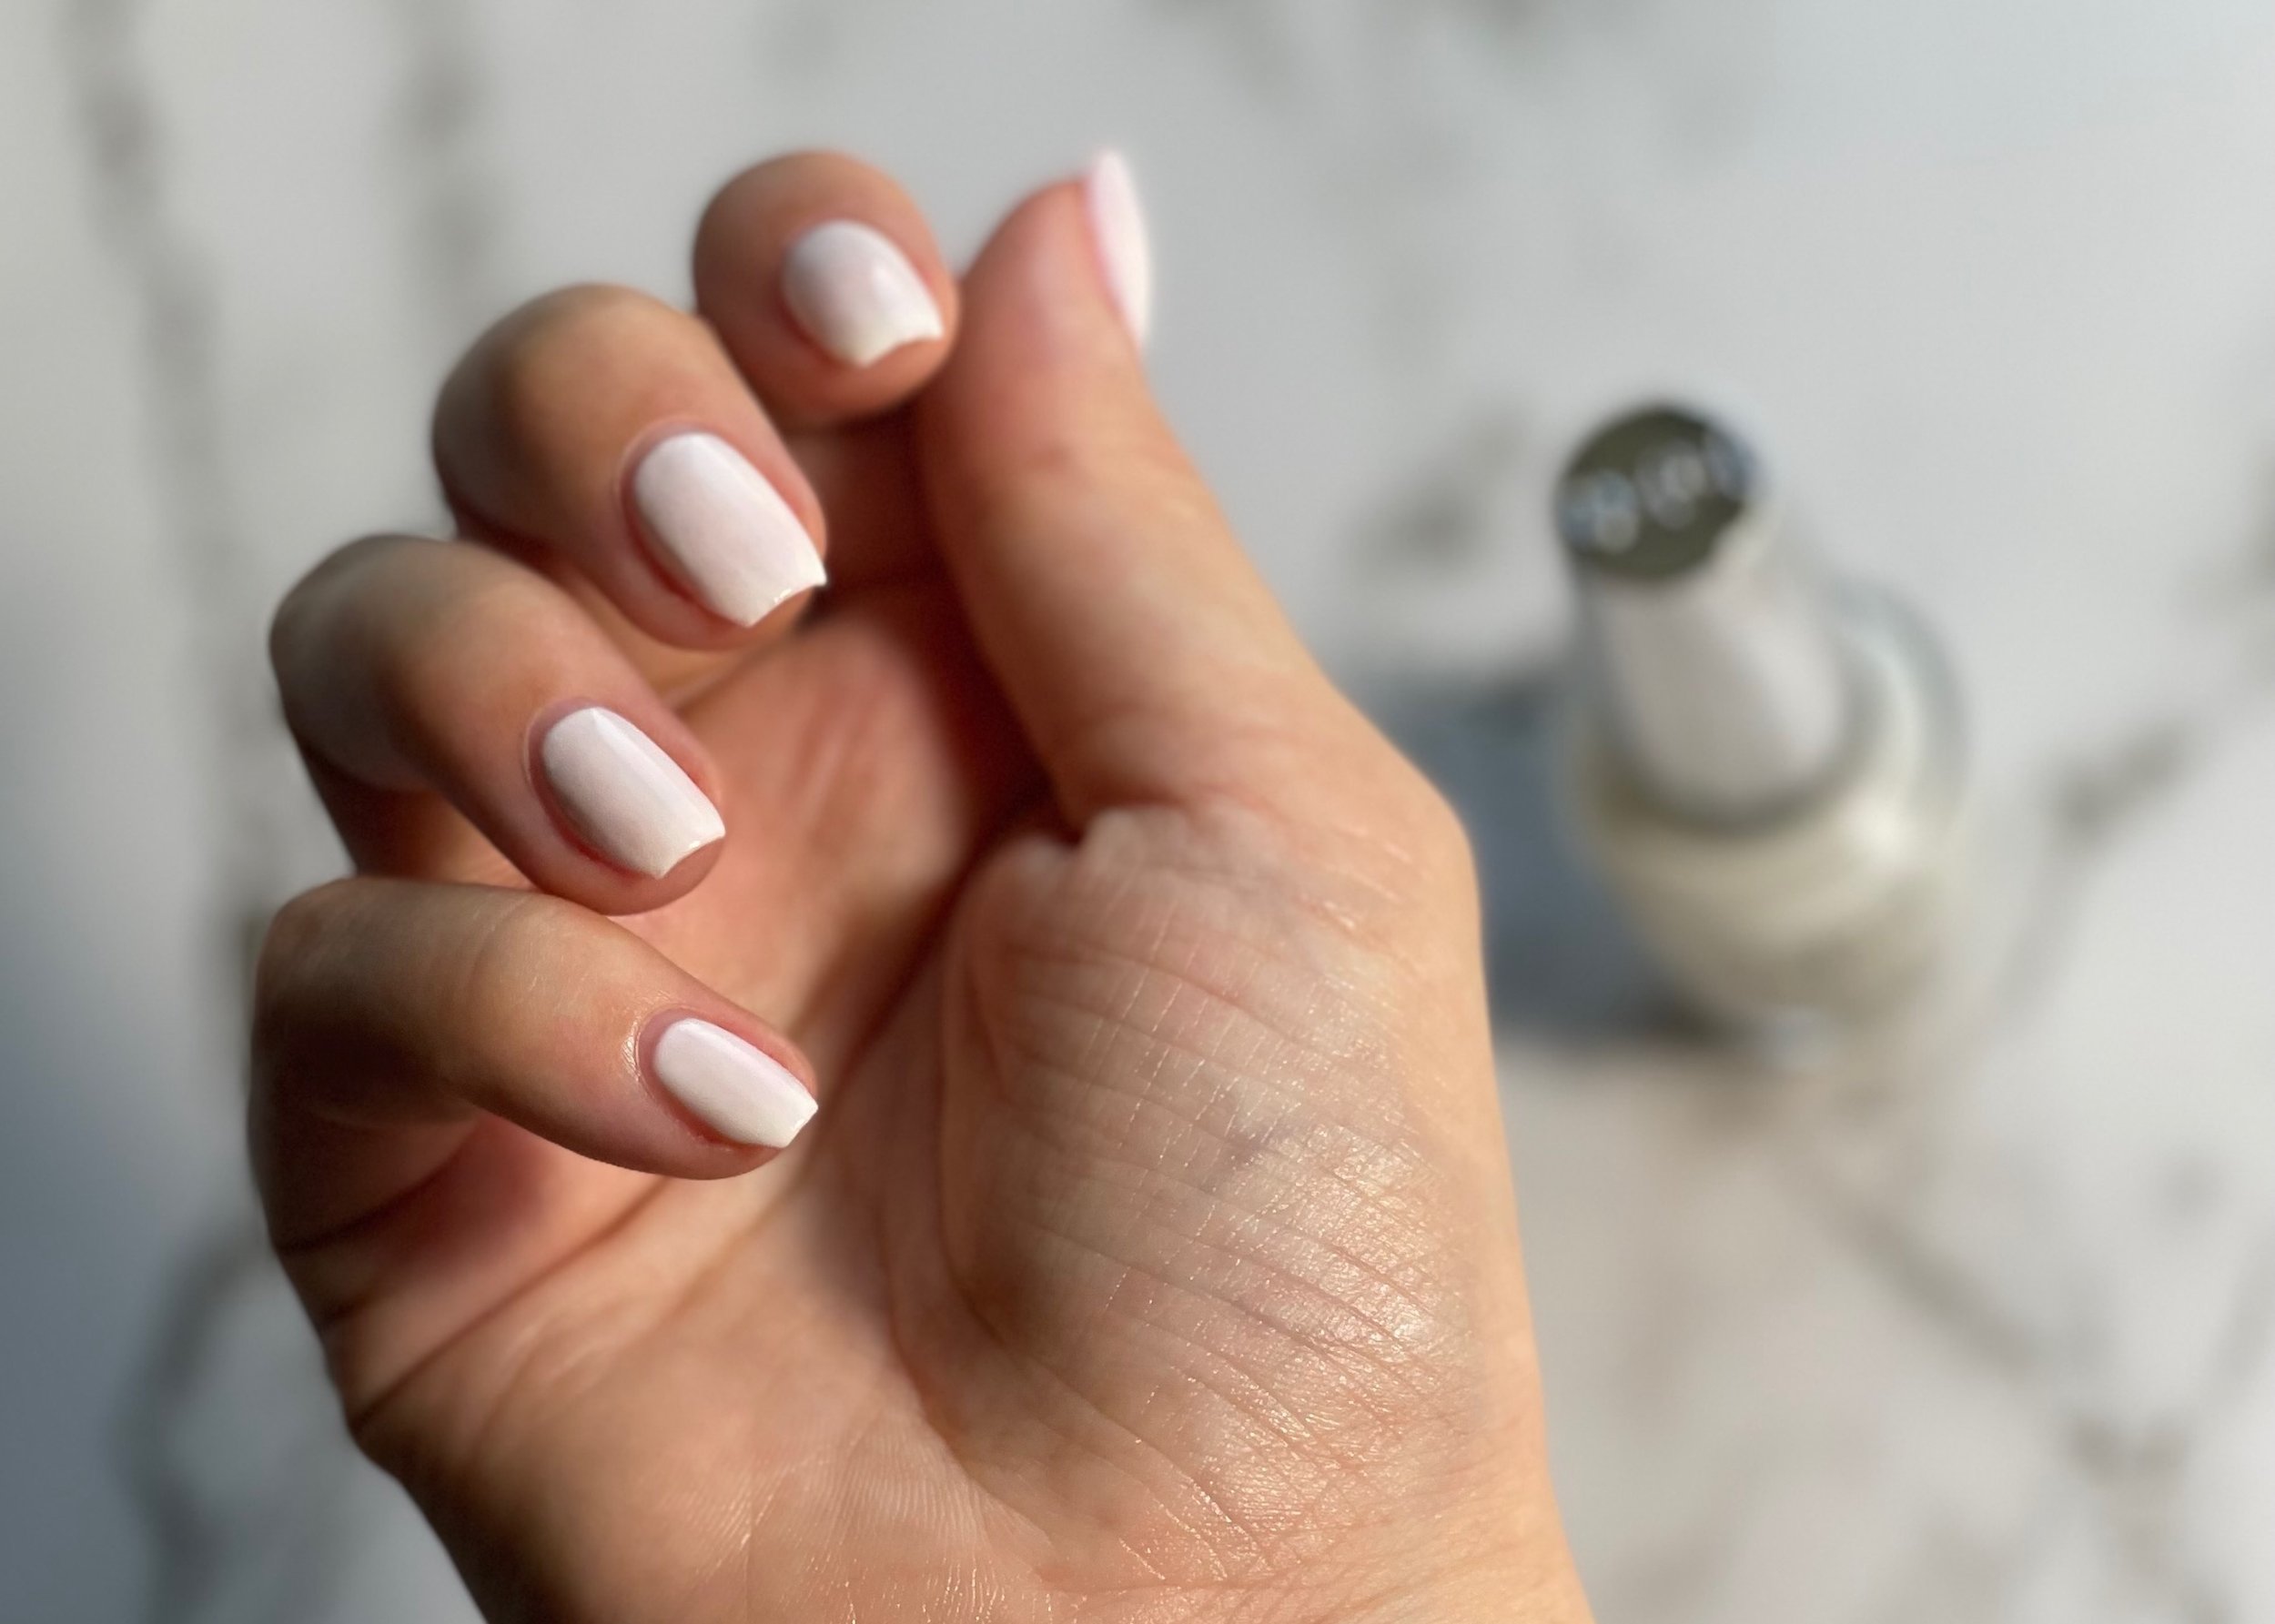 What Exactly Are Beau's Lines on Nails?